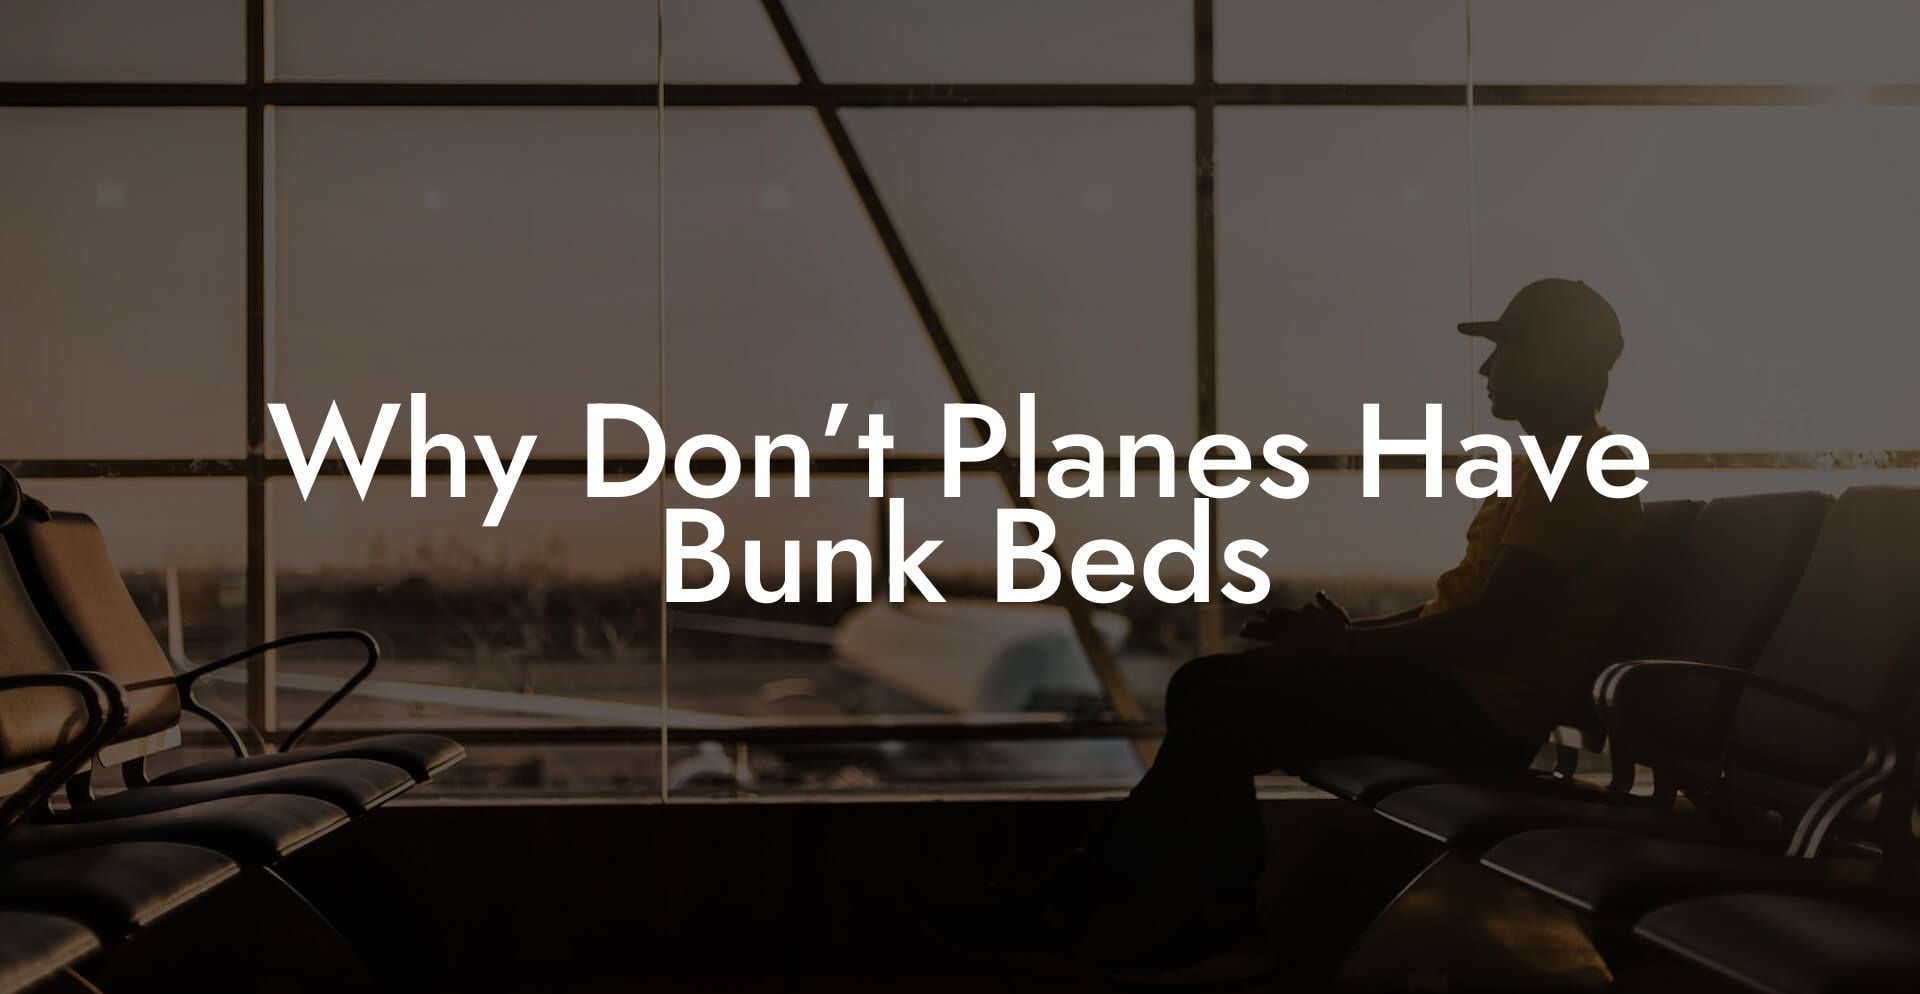 Why Don’t Planes Have Bunk Beds